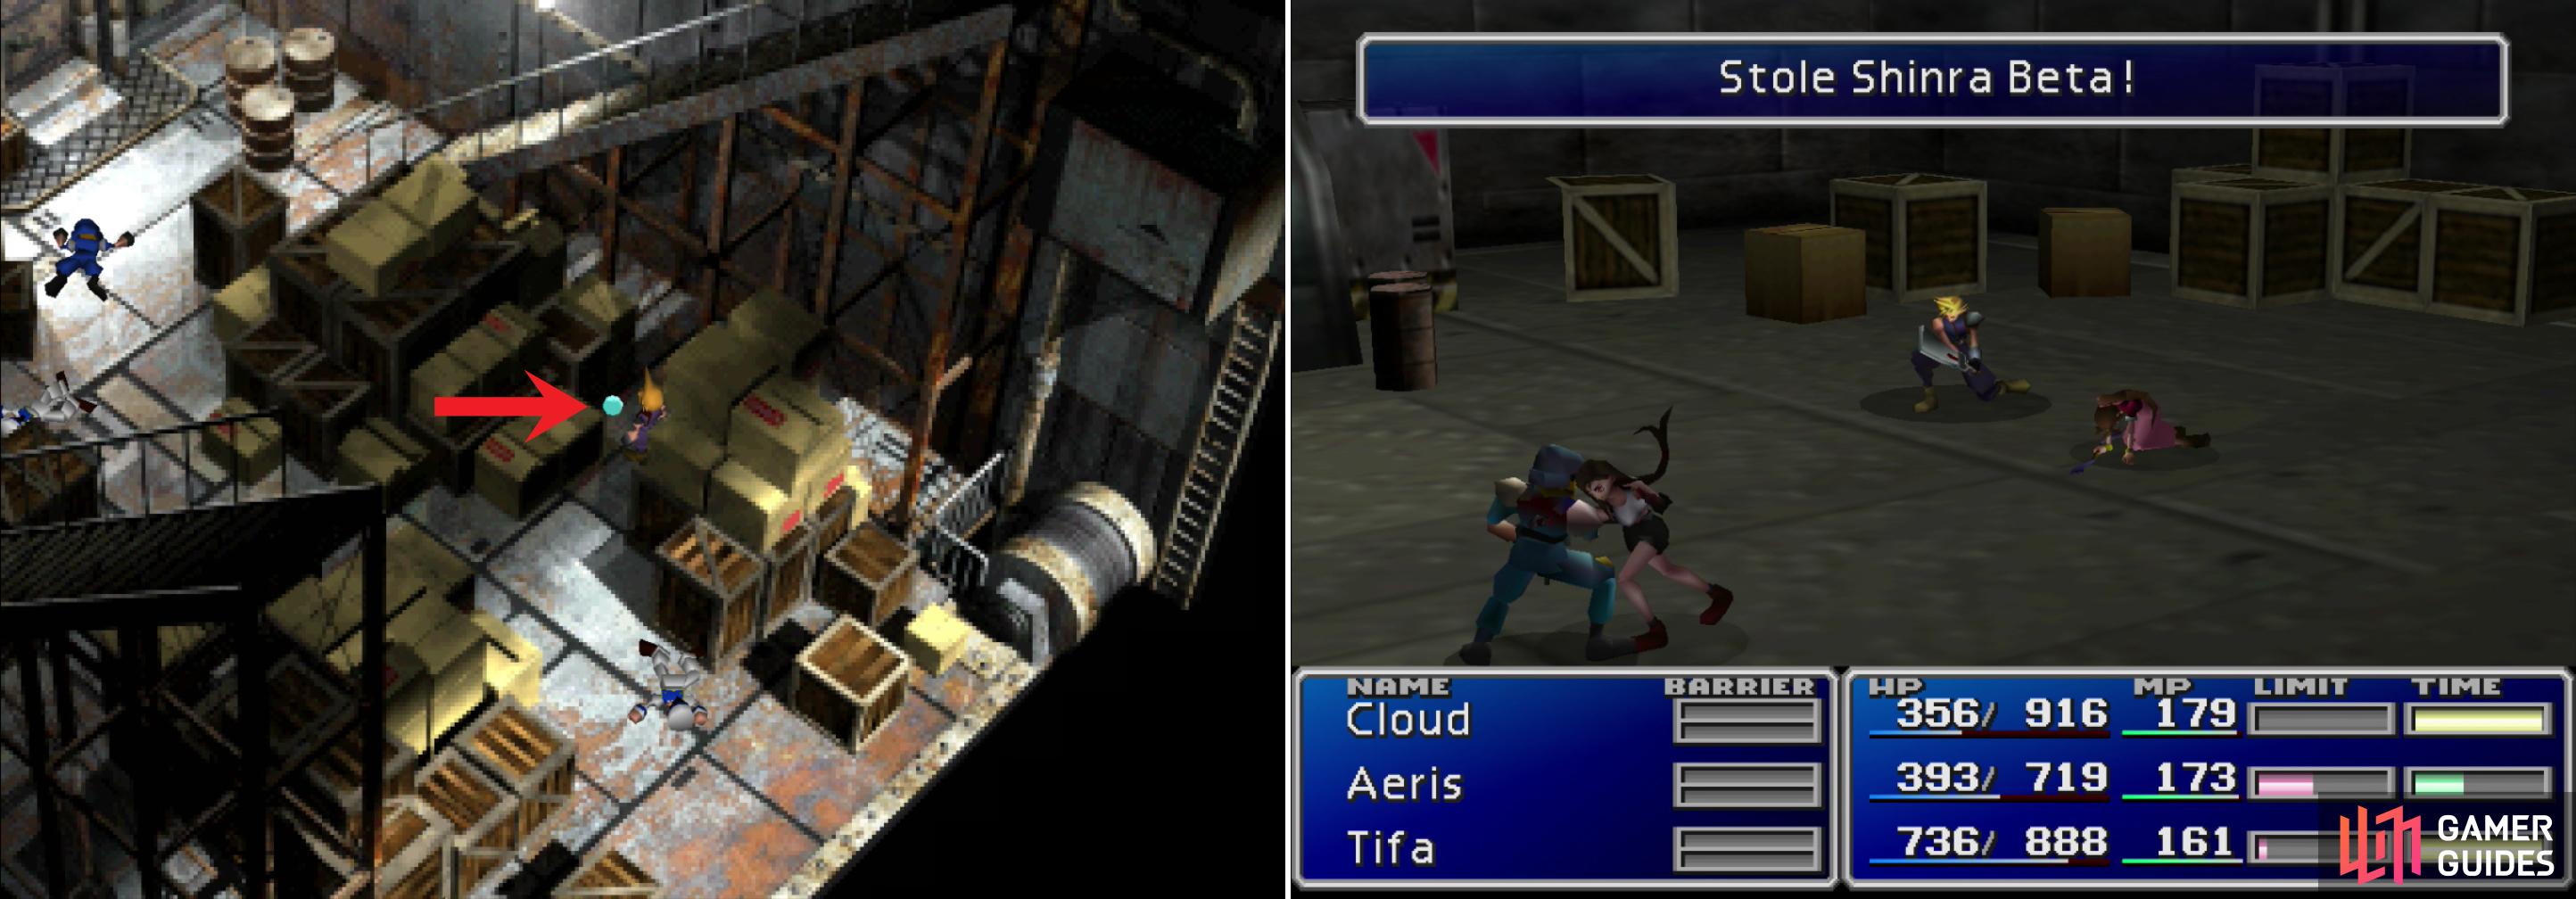 After the ship goes on alert, pick up the All Materia Yuffie was blocking (left). You can also steal Shinra Betas from Marines (right).